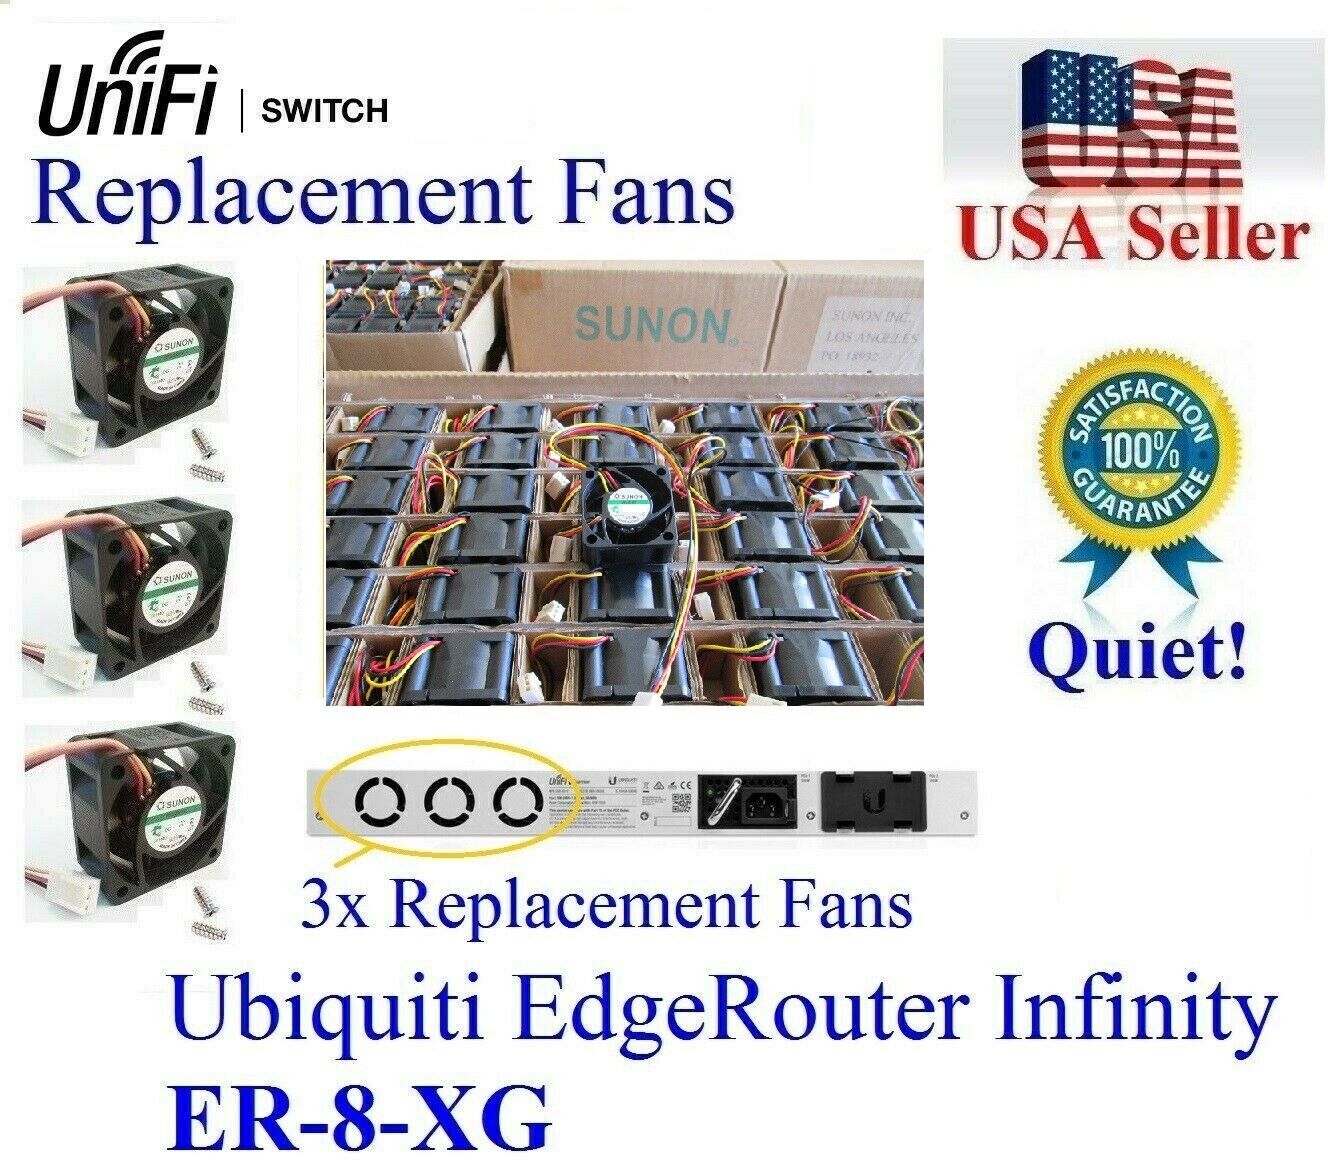 Pack of 3x Quiet replacement fans for Ubiquiti EdgeRouter Infinity  ER-8-XG